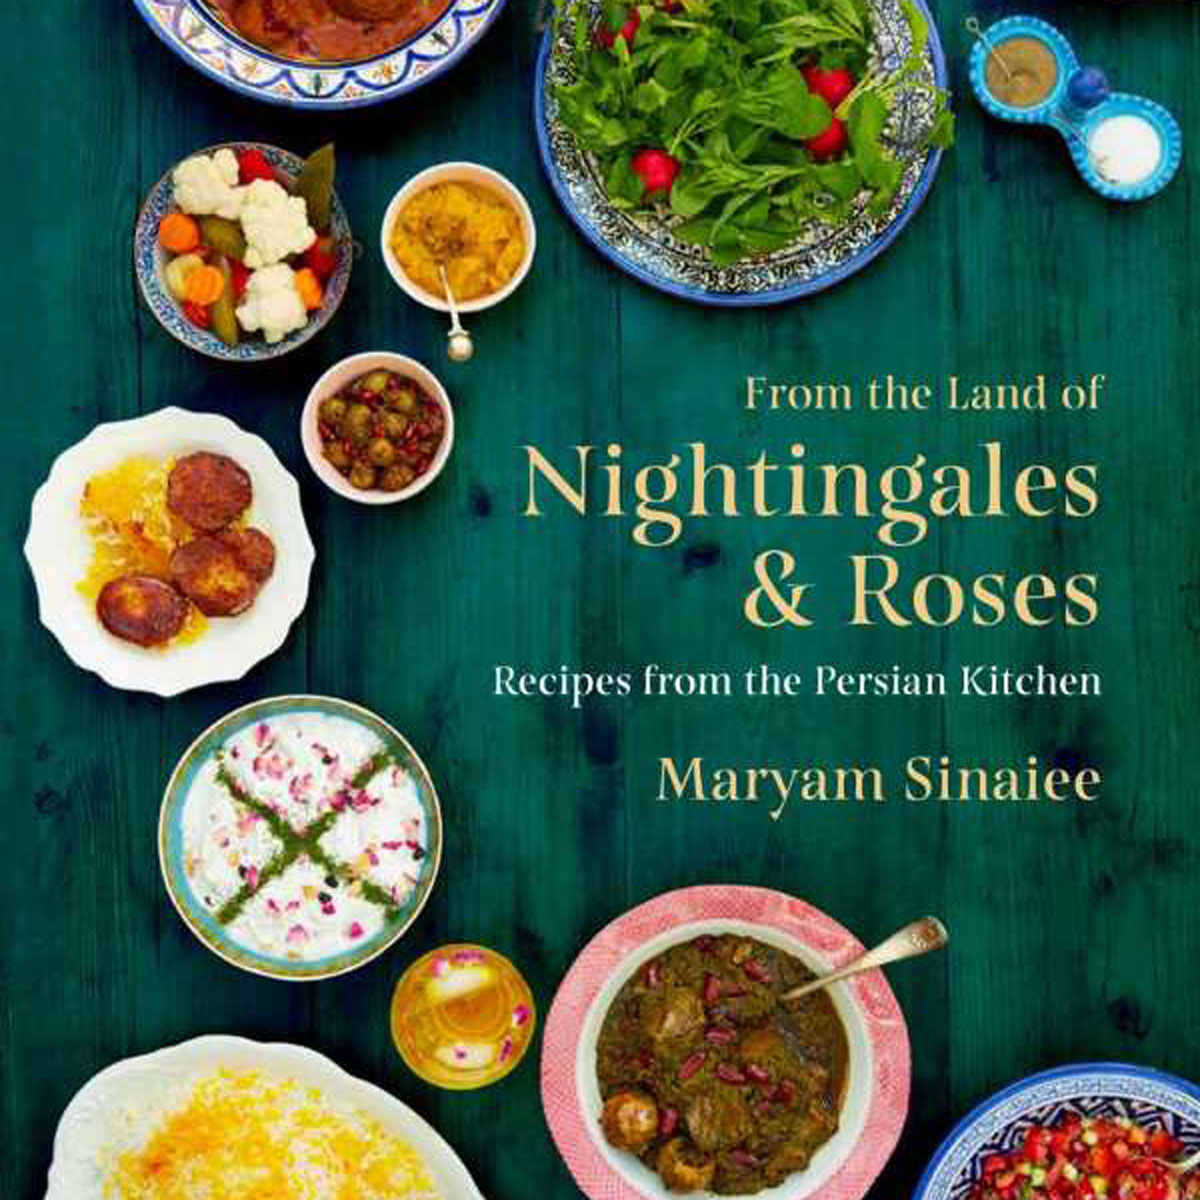 From the Land of Nightingales & Roses by Maryam Sinaiee